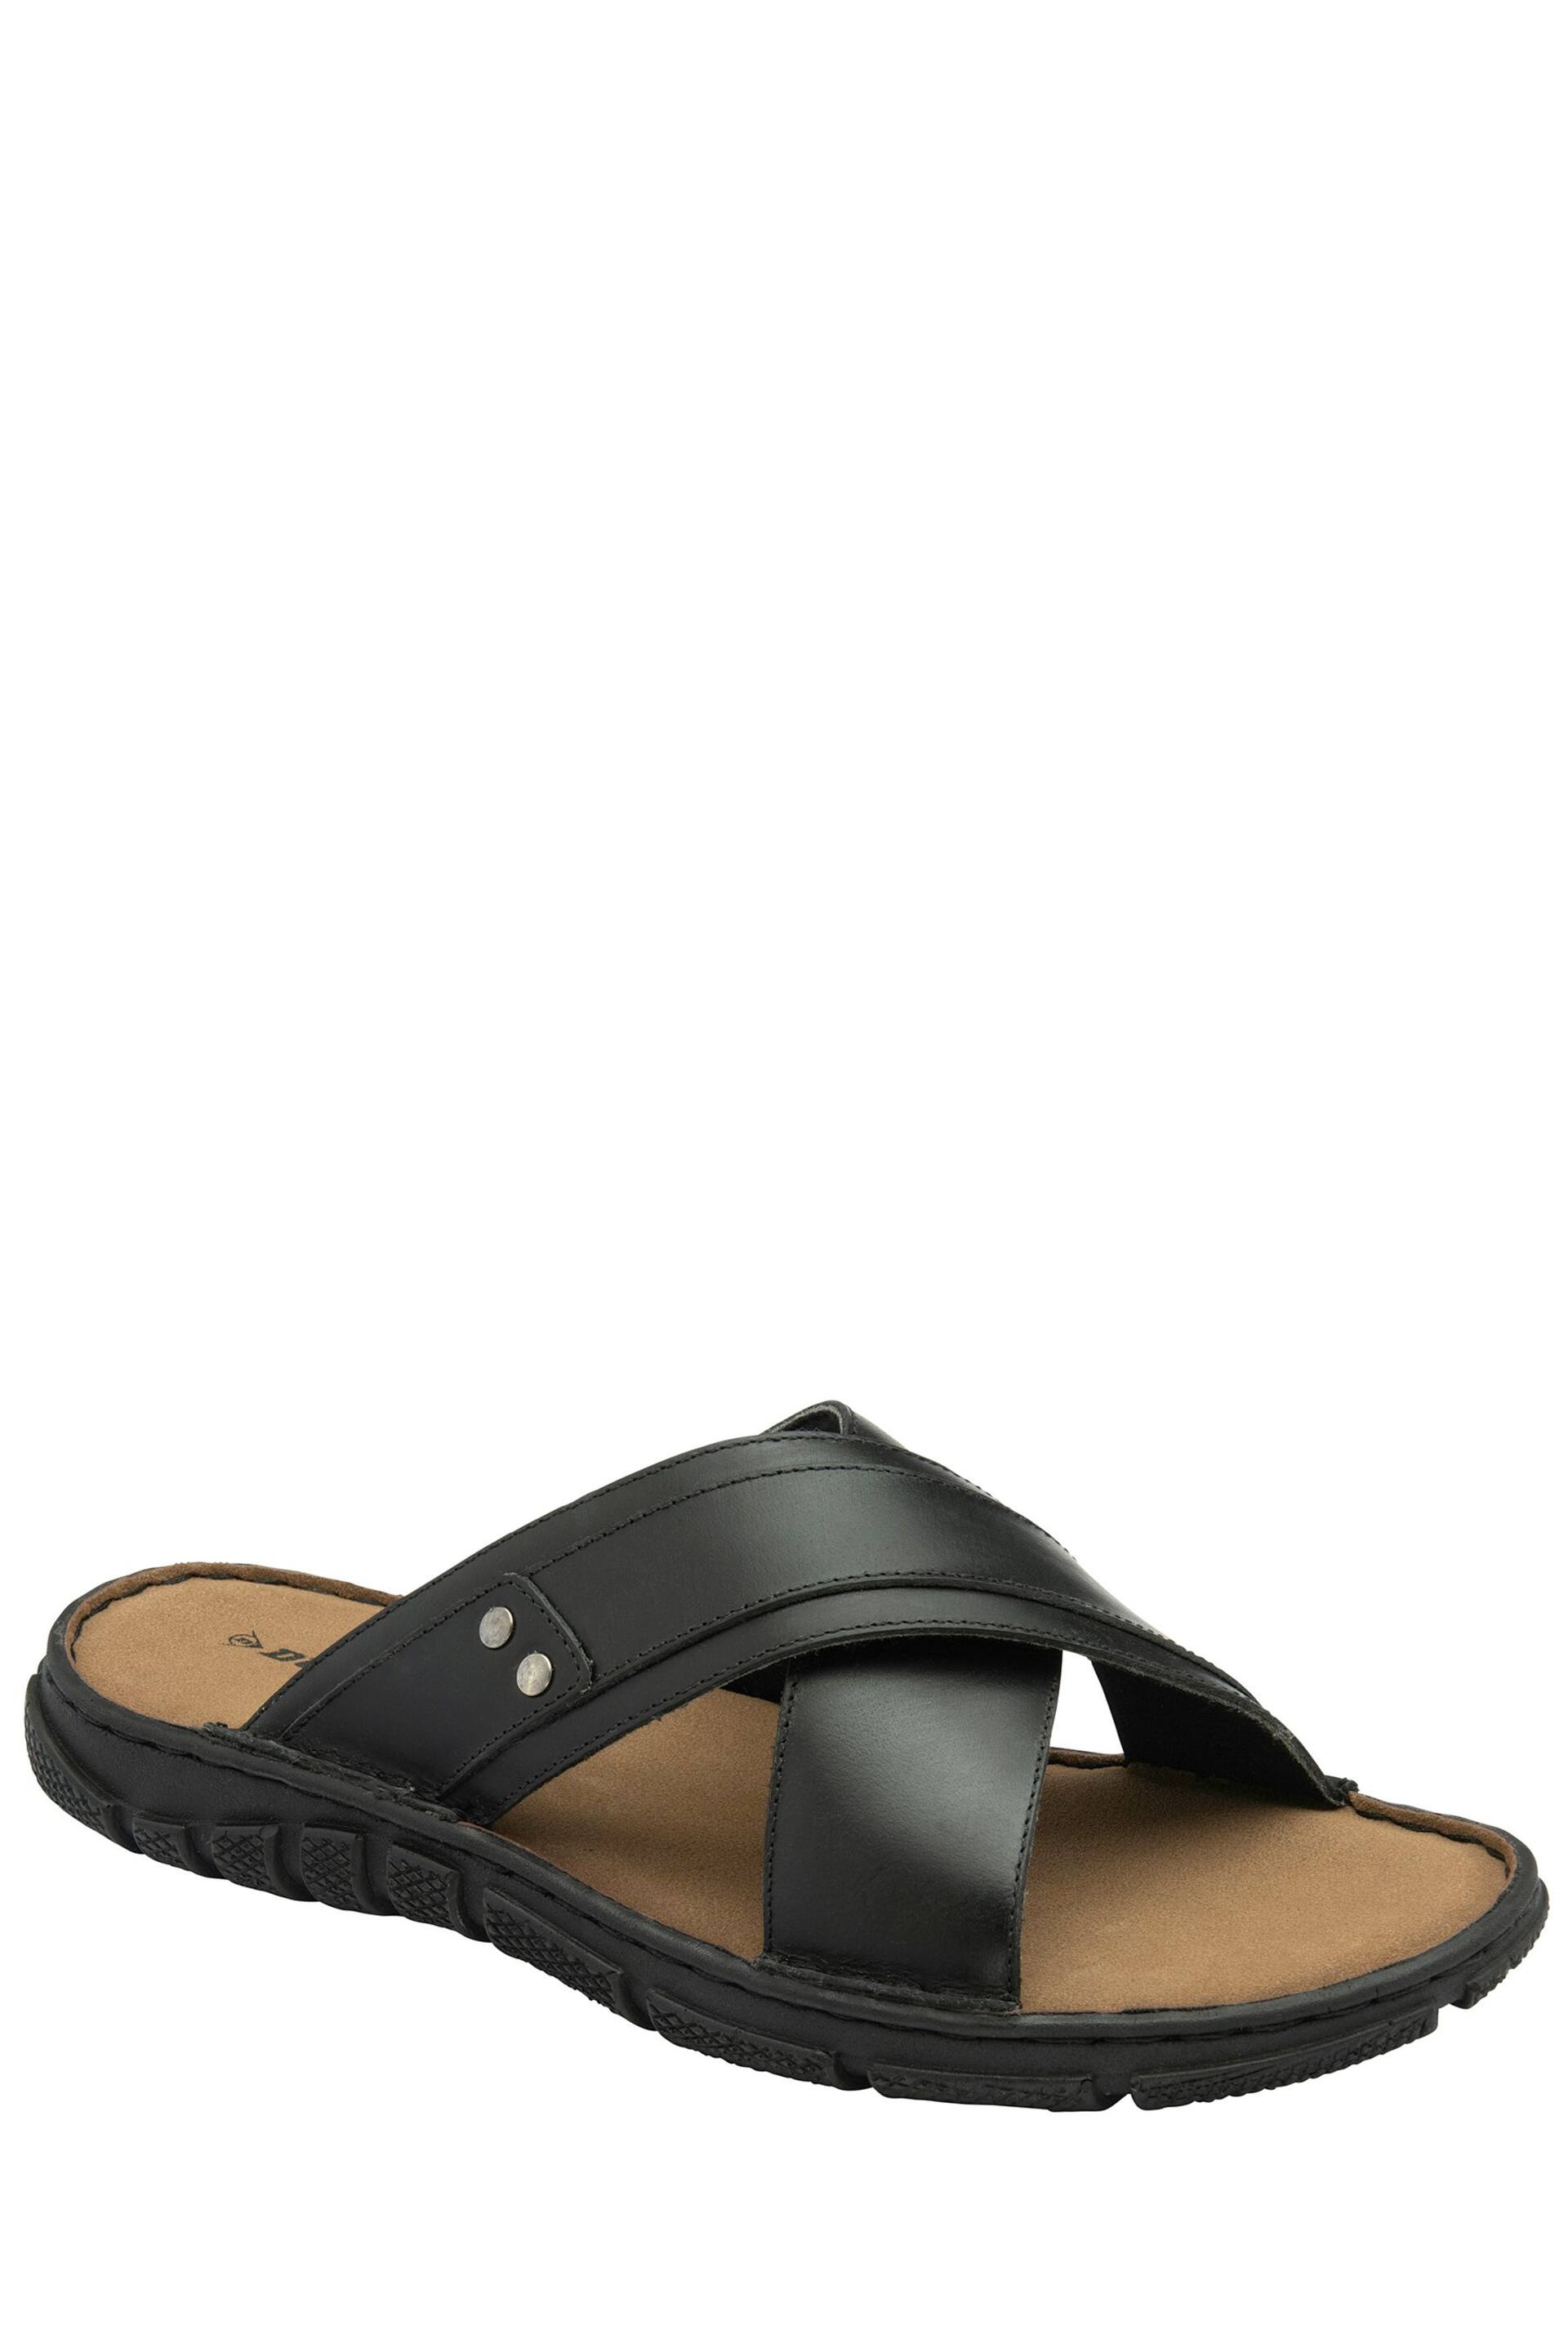 Dunlop Black Crossover Mens Mules - Image 1 of 4